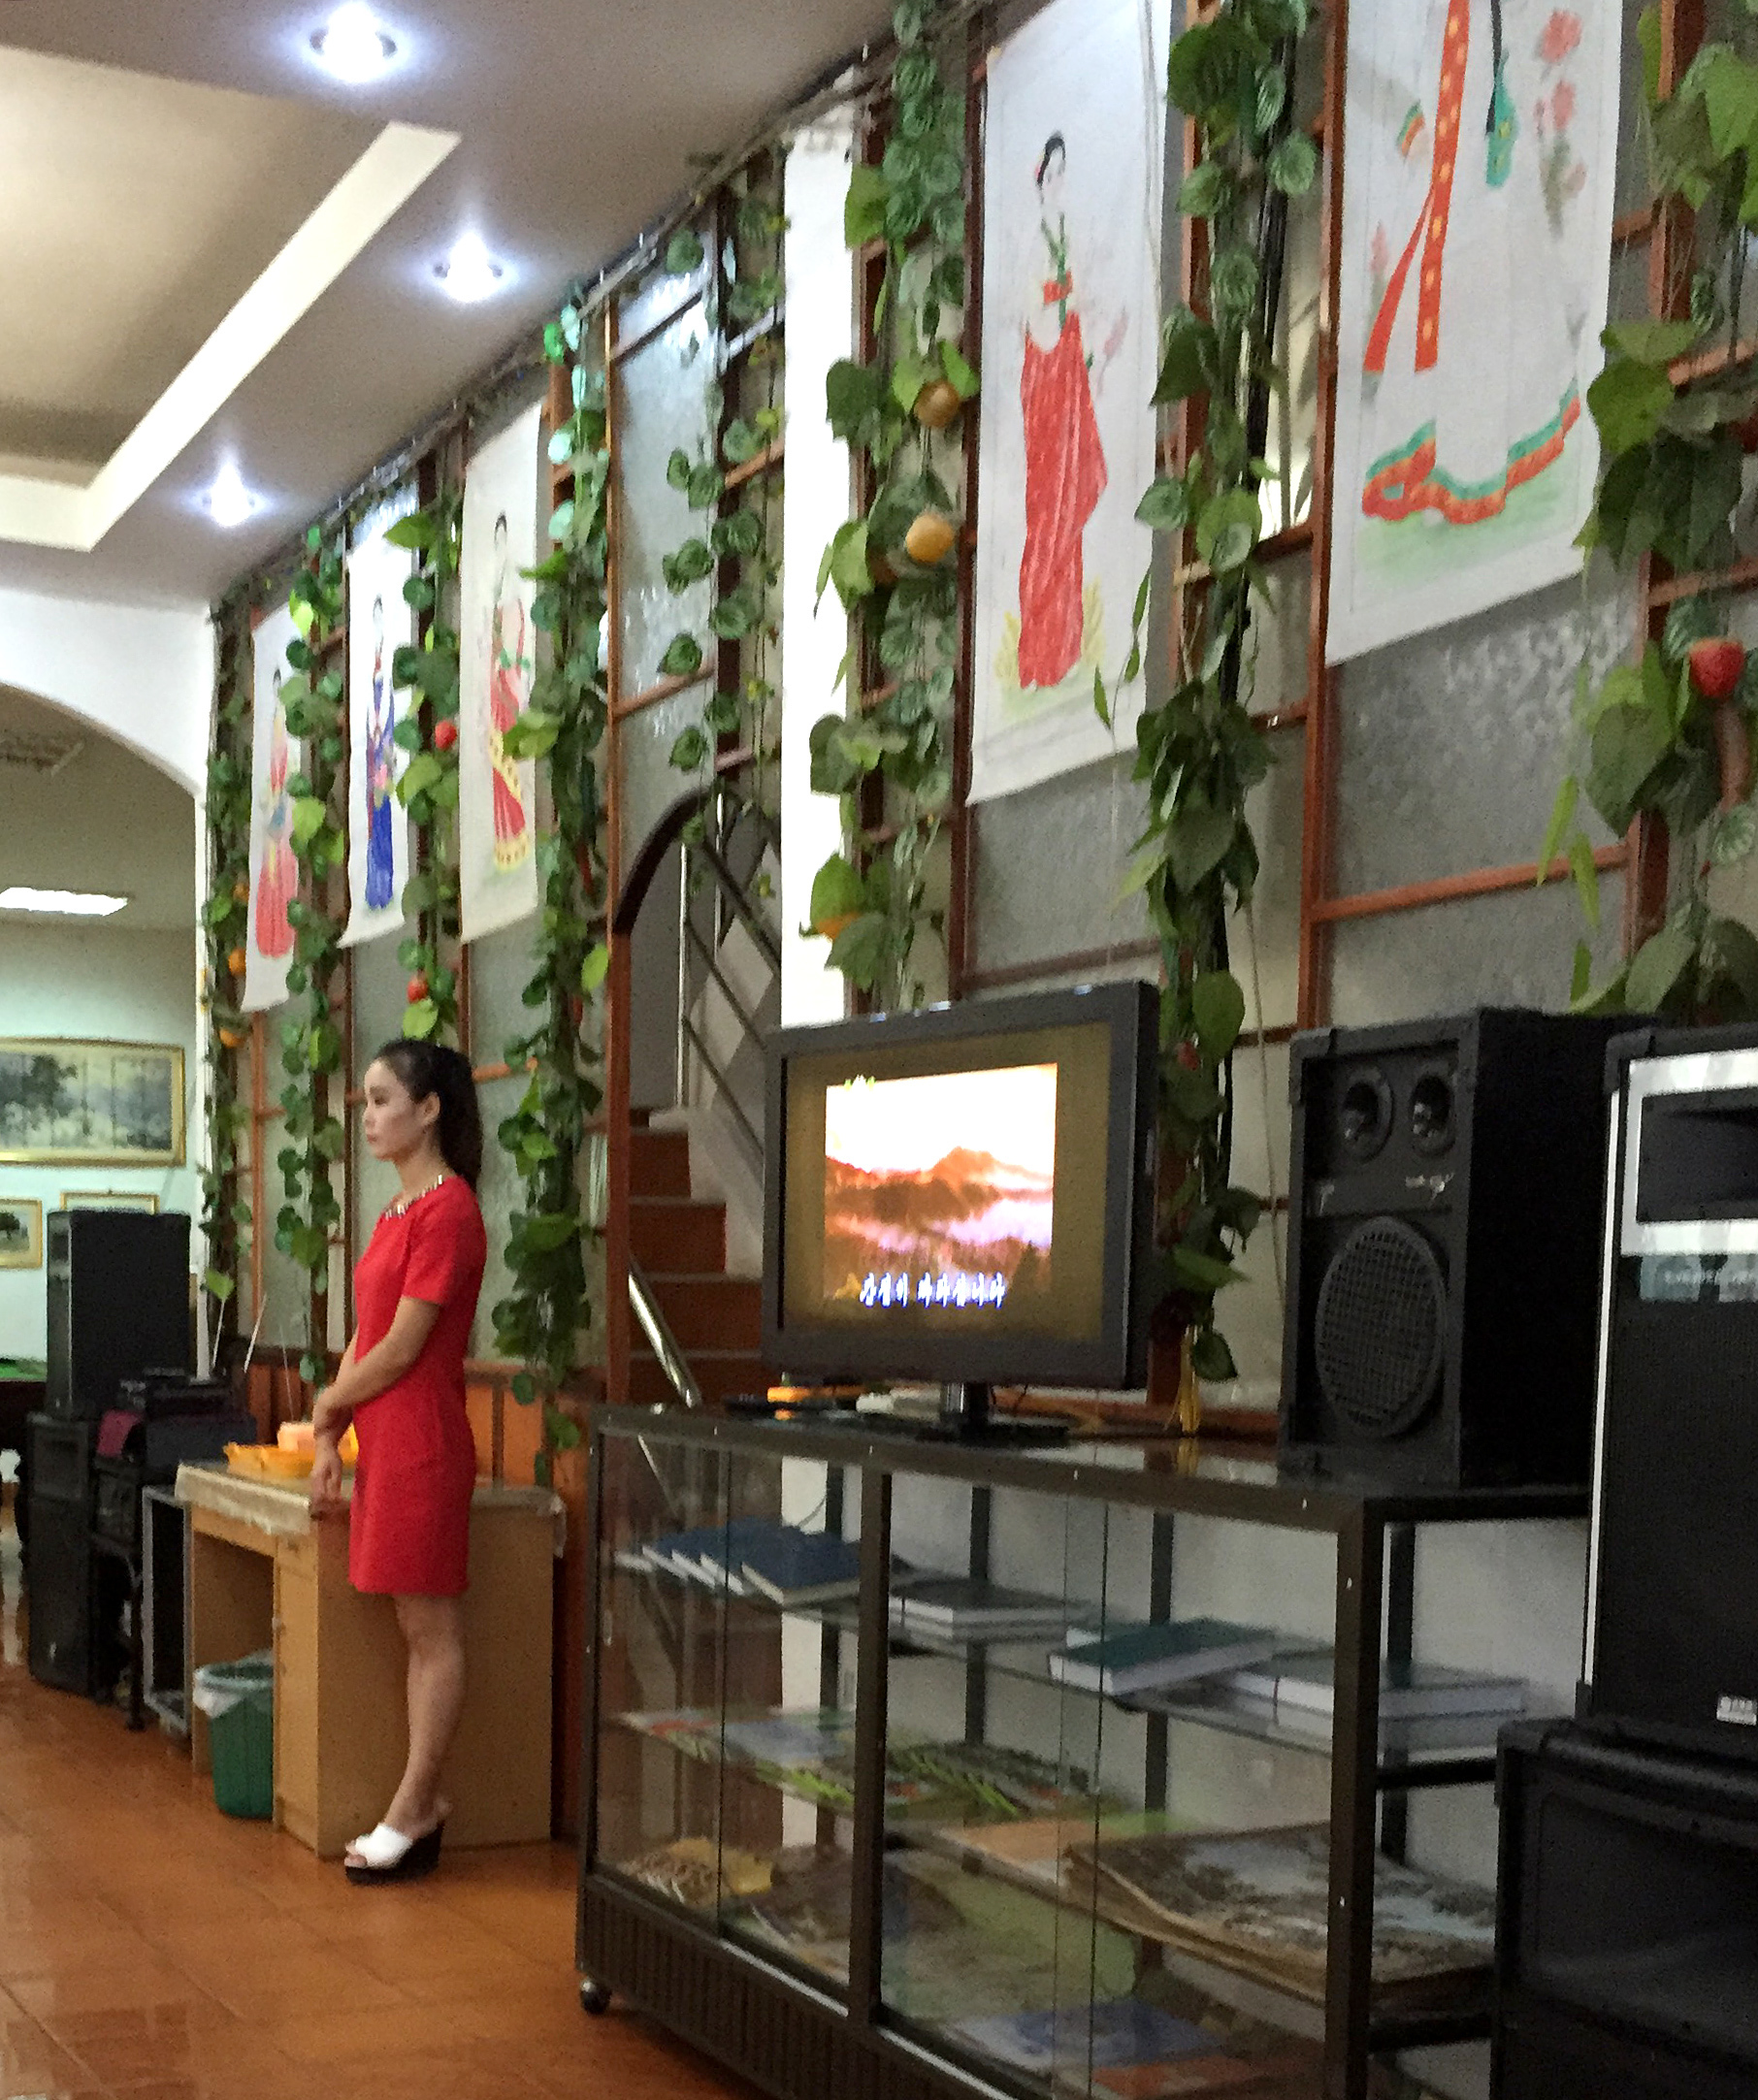 A waitress at Pyongyang Restaurant in Vientiane was able to speak Korean, a little Lao and Mandarin Chinese. Jobs outside North Korea like these are highly coveted, but also considered by human rights groups as a form of slave labor, as workers don't keep the majority of their wages and are under strict supervision.